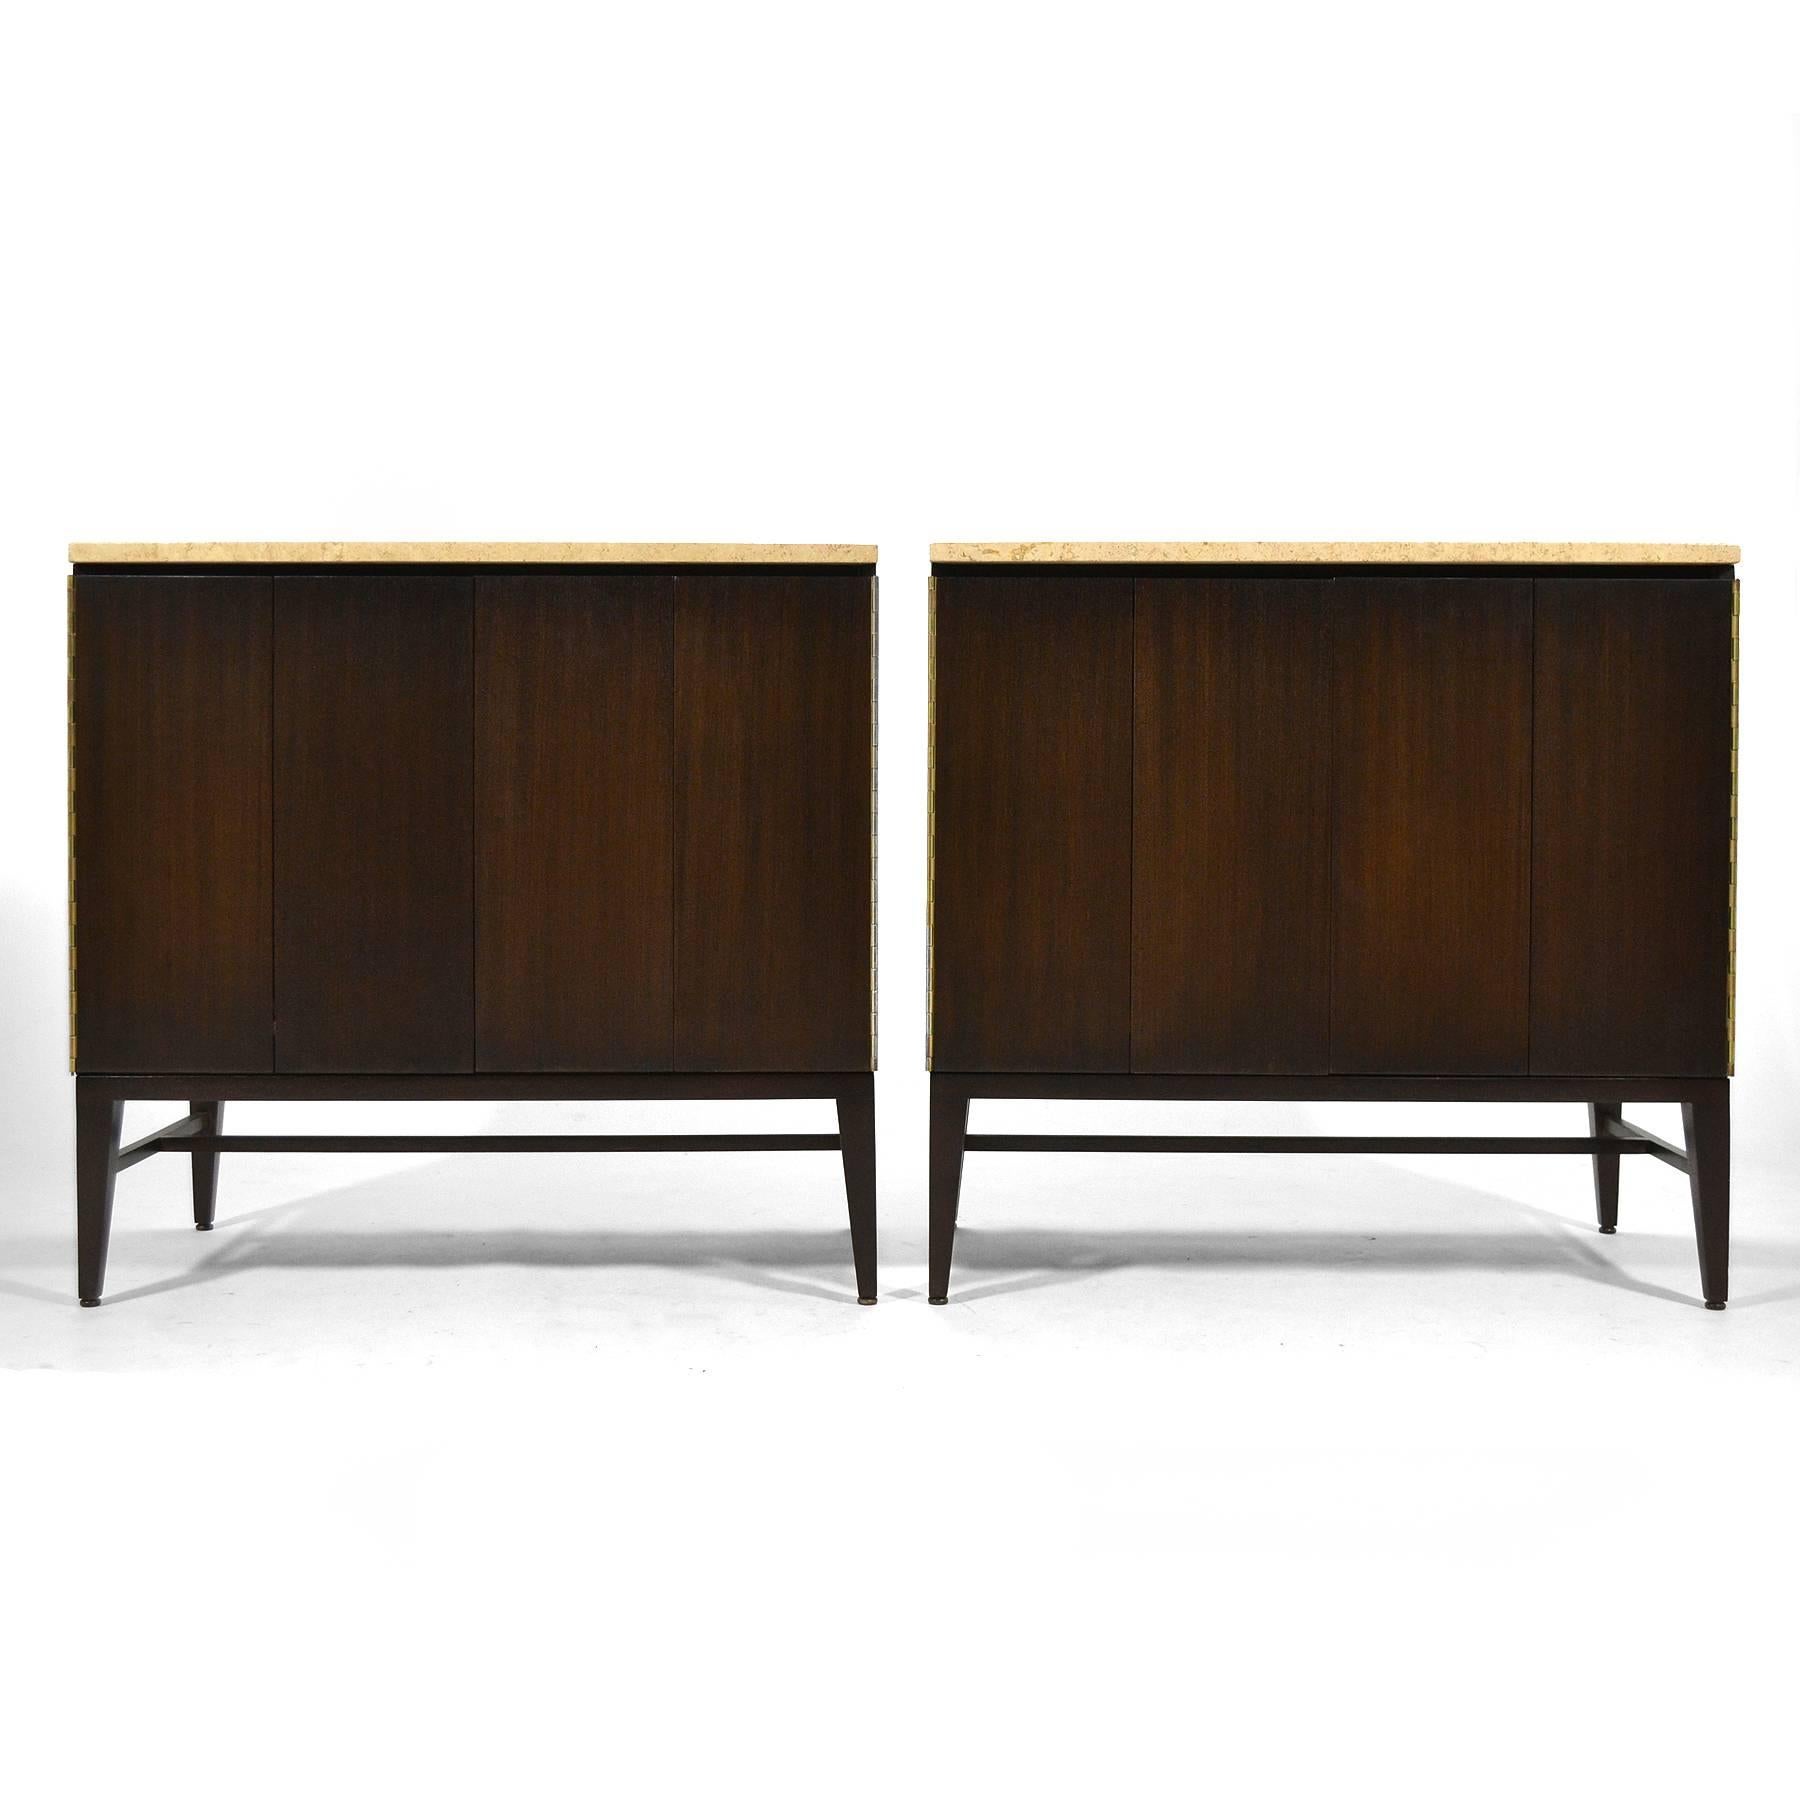 This pair of stunning McCobb cabinets by Calvin have a rich, dark finish on the mahogany cases and are topped with Italian travertine. One is fitted with four drawers, the other a single adjustable shelf. They were used by the original owner as a